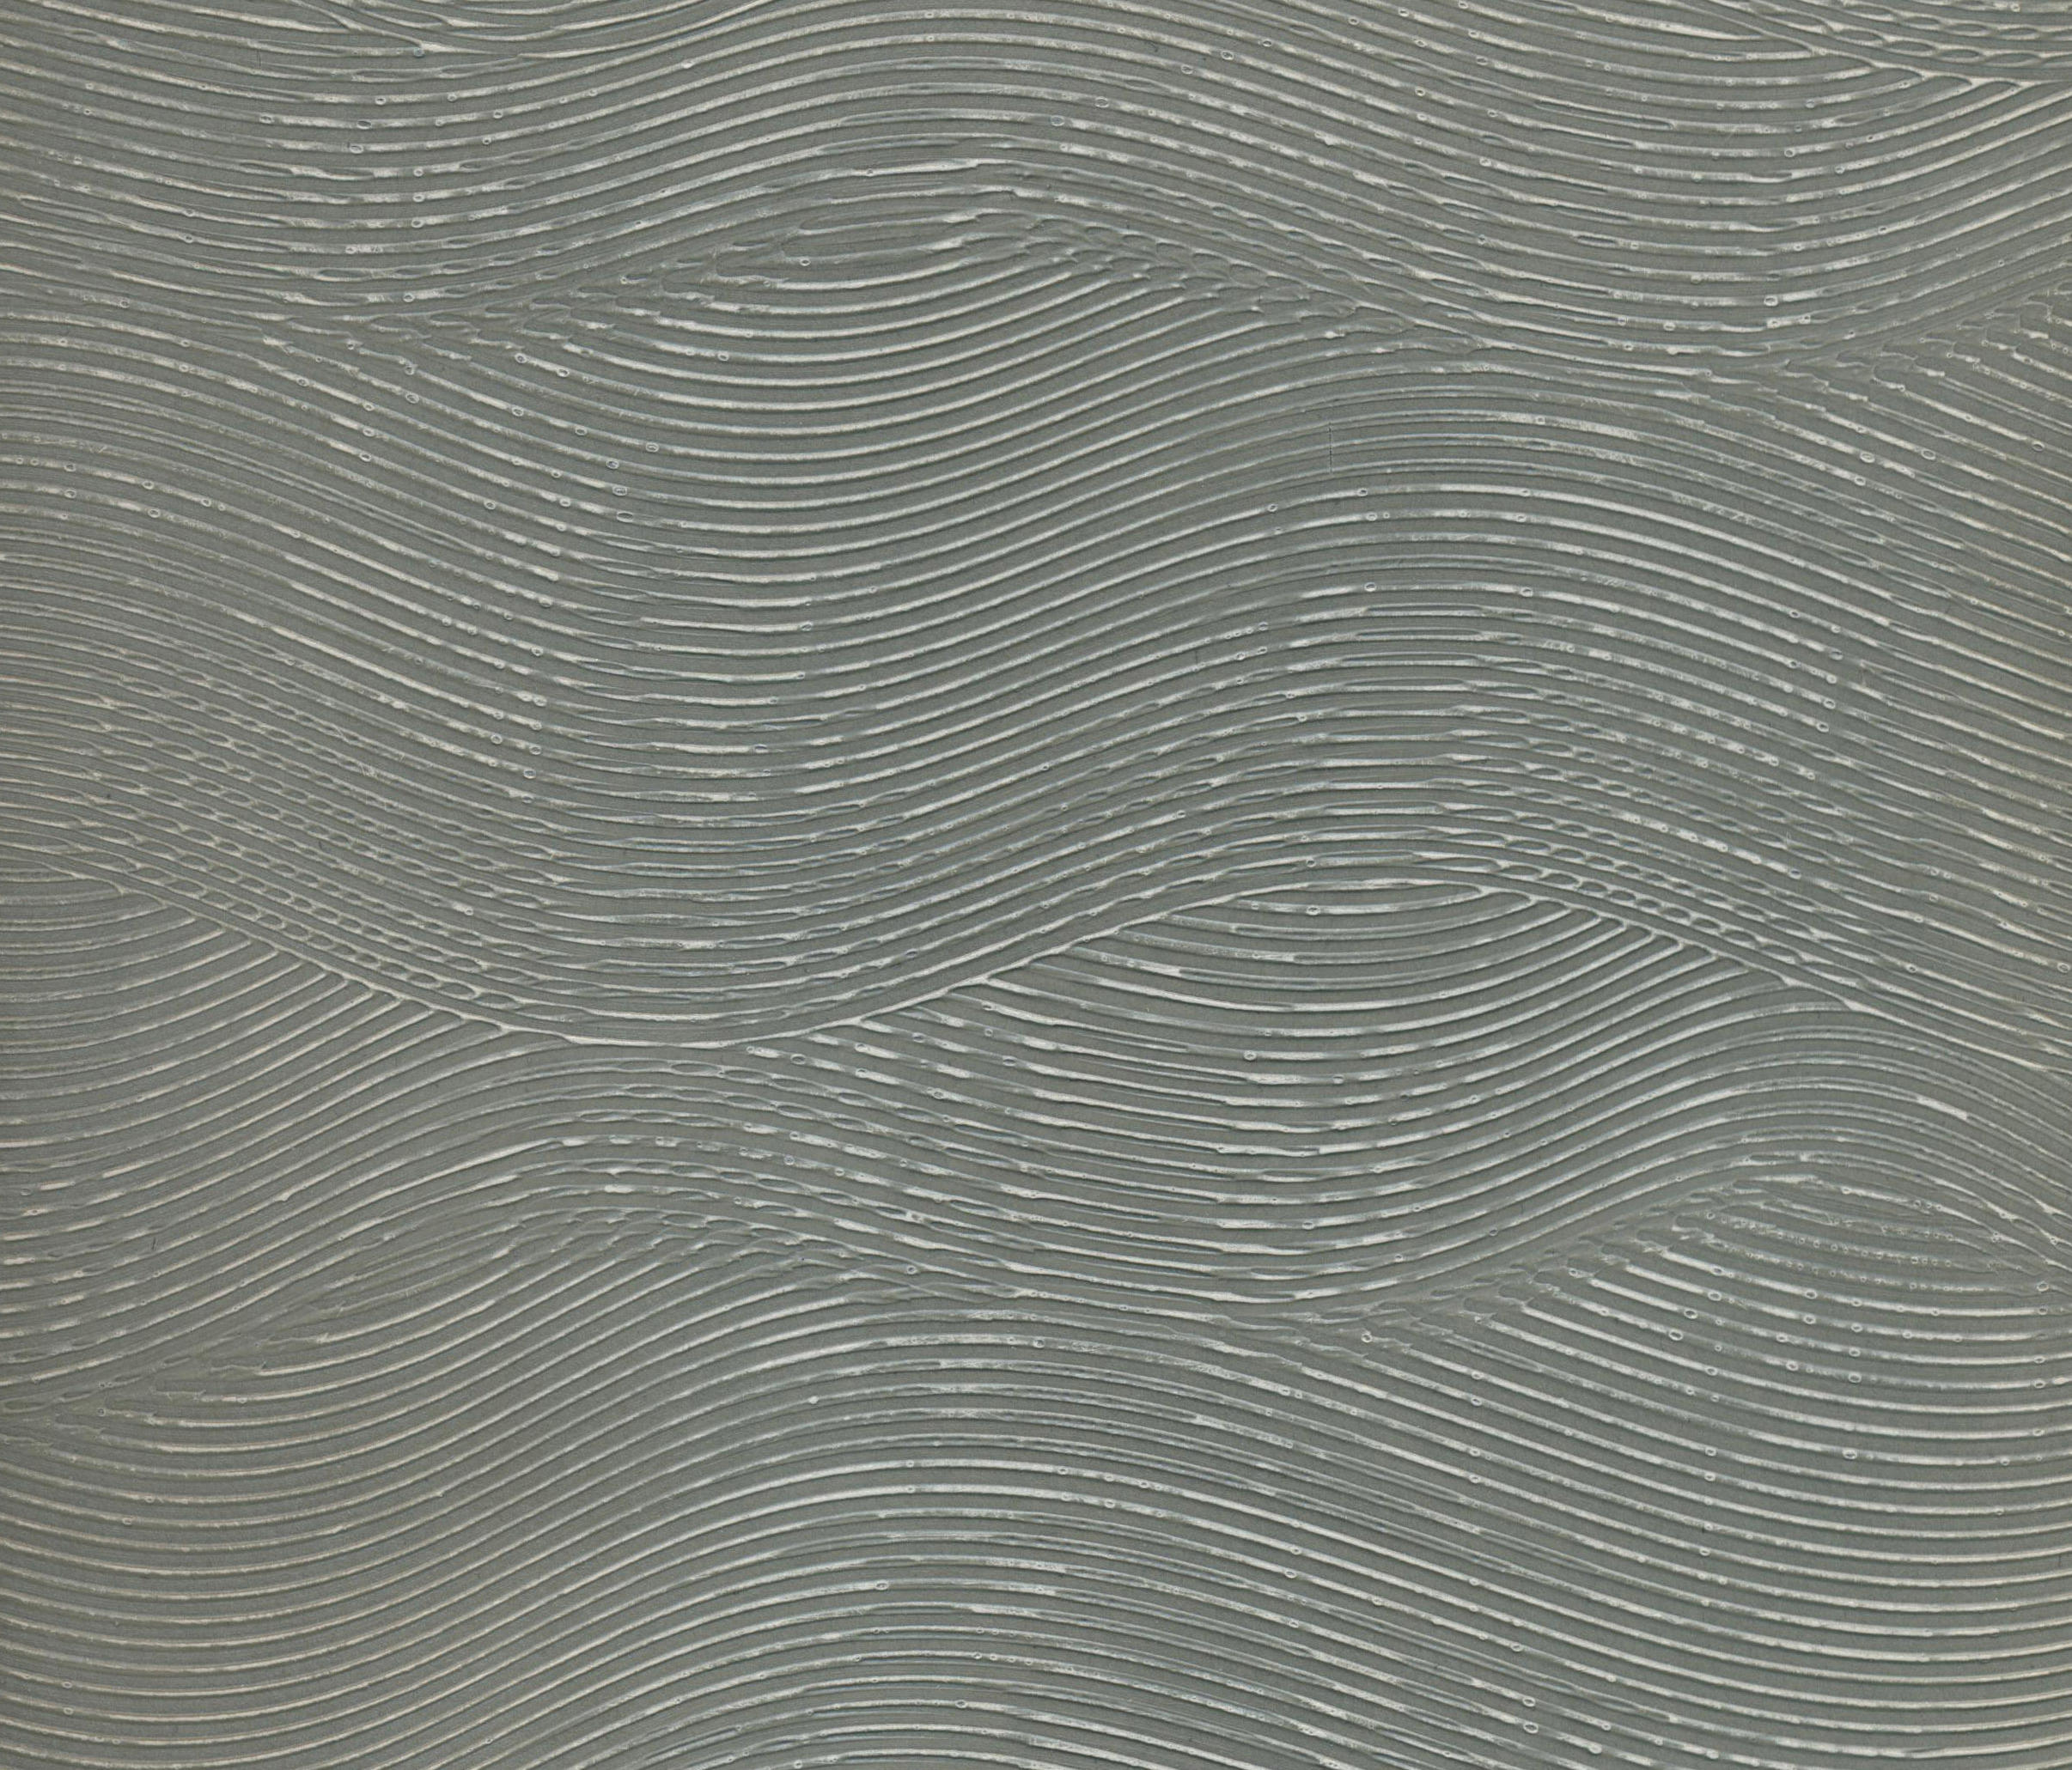 WAVE WALLPAPER - Wall coverings / wallpapers from Agena | Architonic